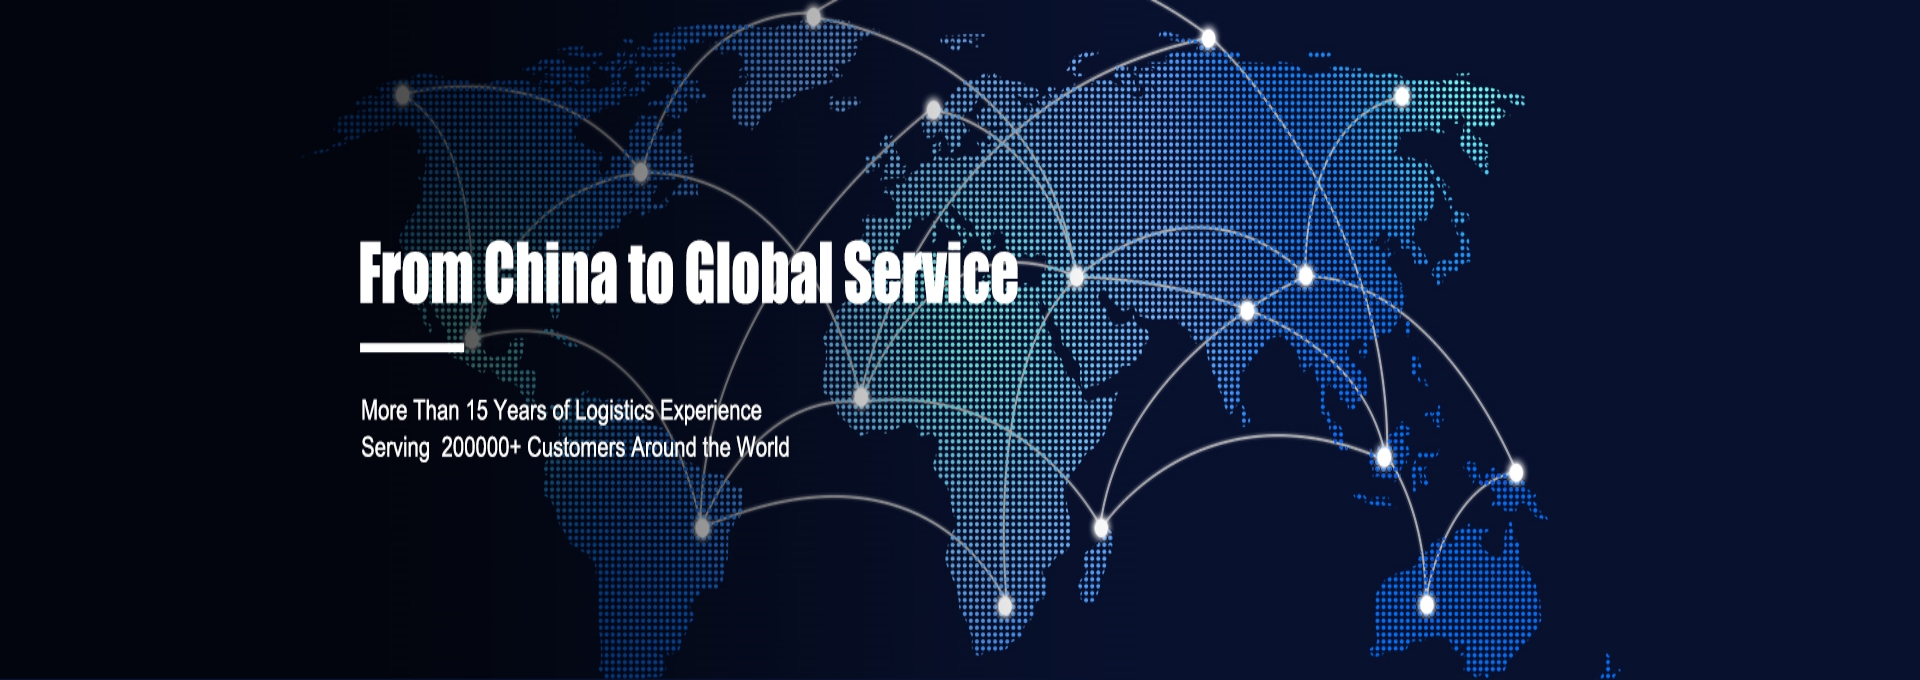 Streamlined Shipping Services: Meidi International Freight AEI Overview